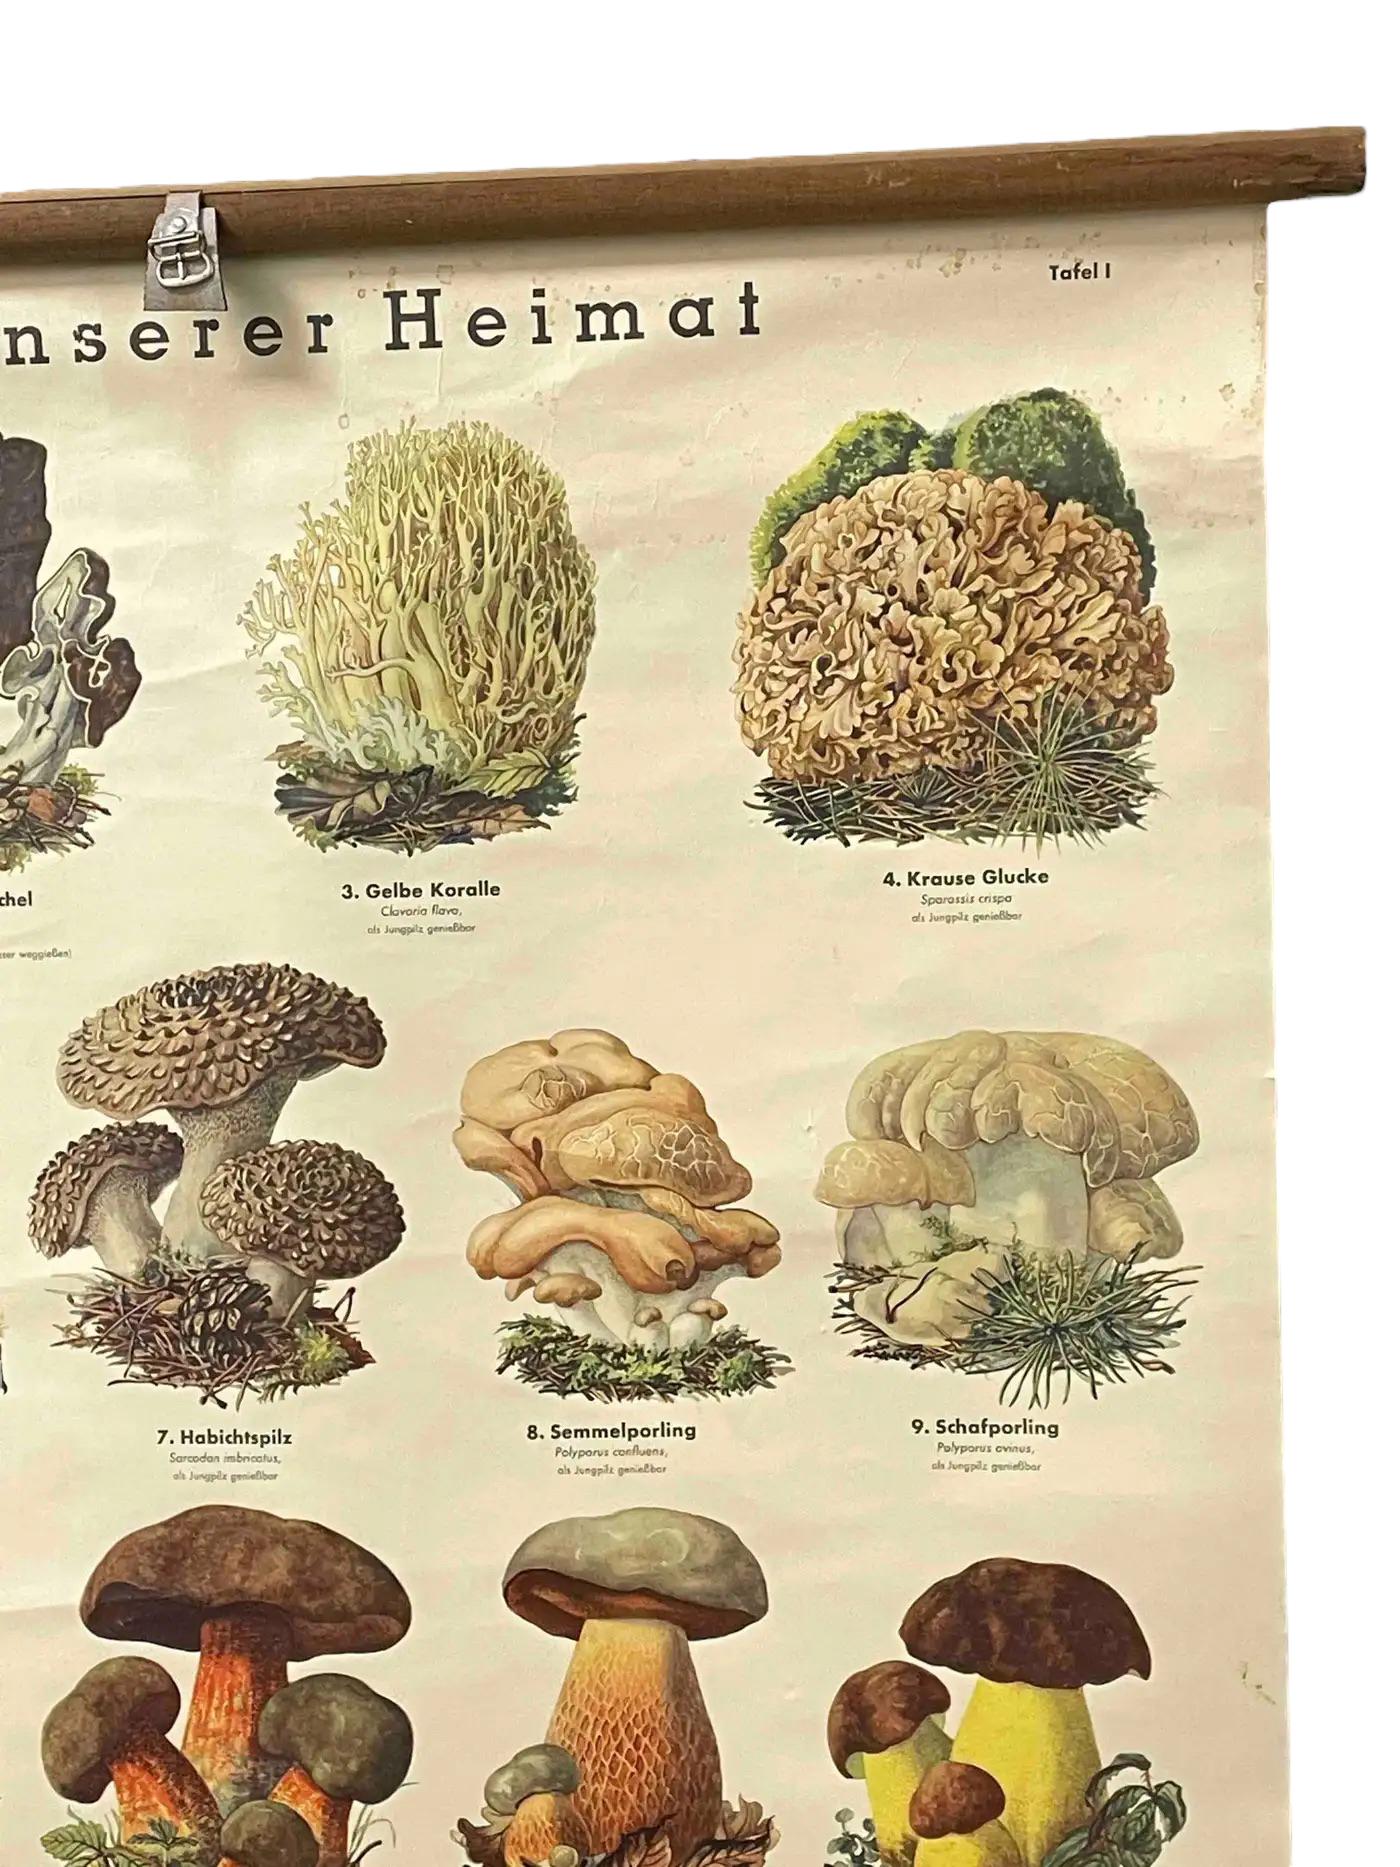 Mushrooms of Europe Rollable Poster Print Wall Chart, Austria 1950s 5